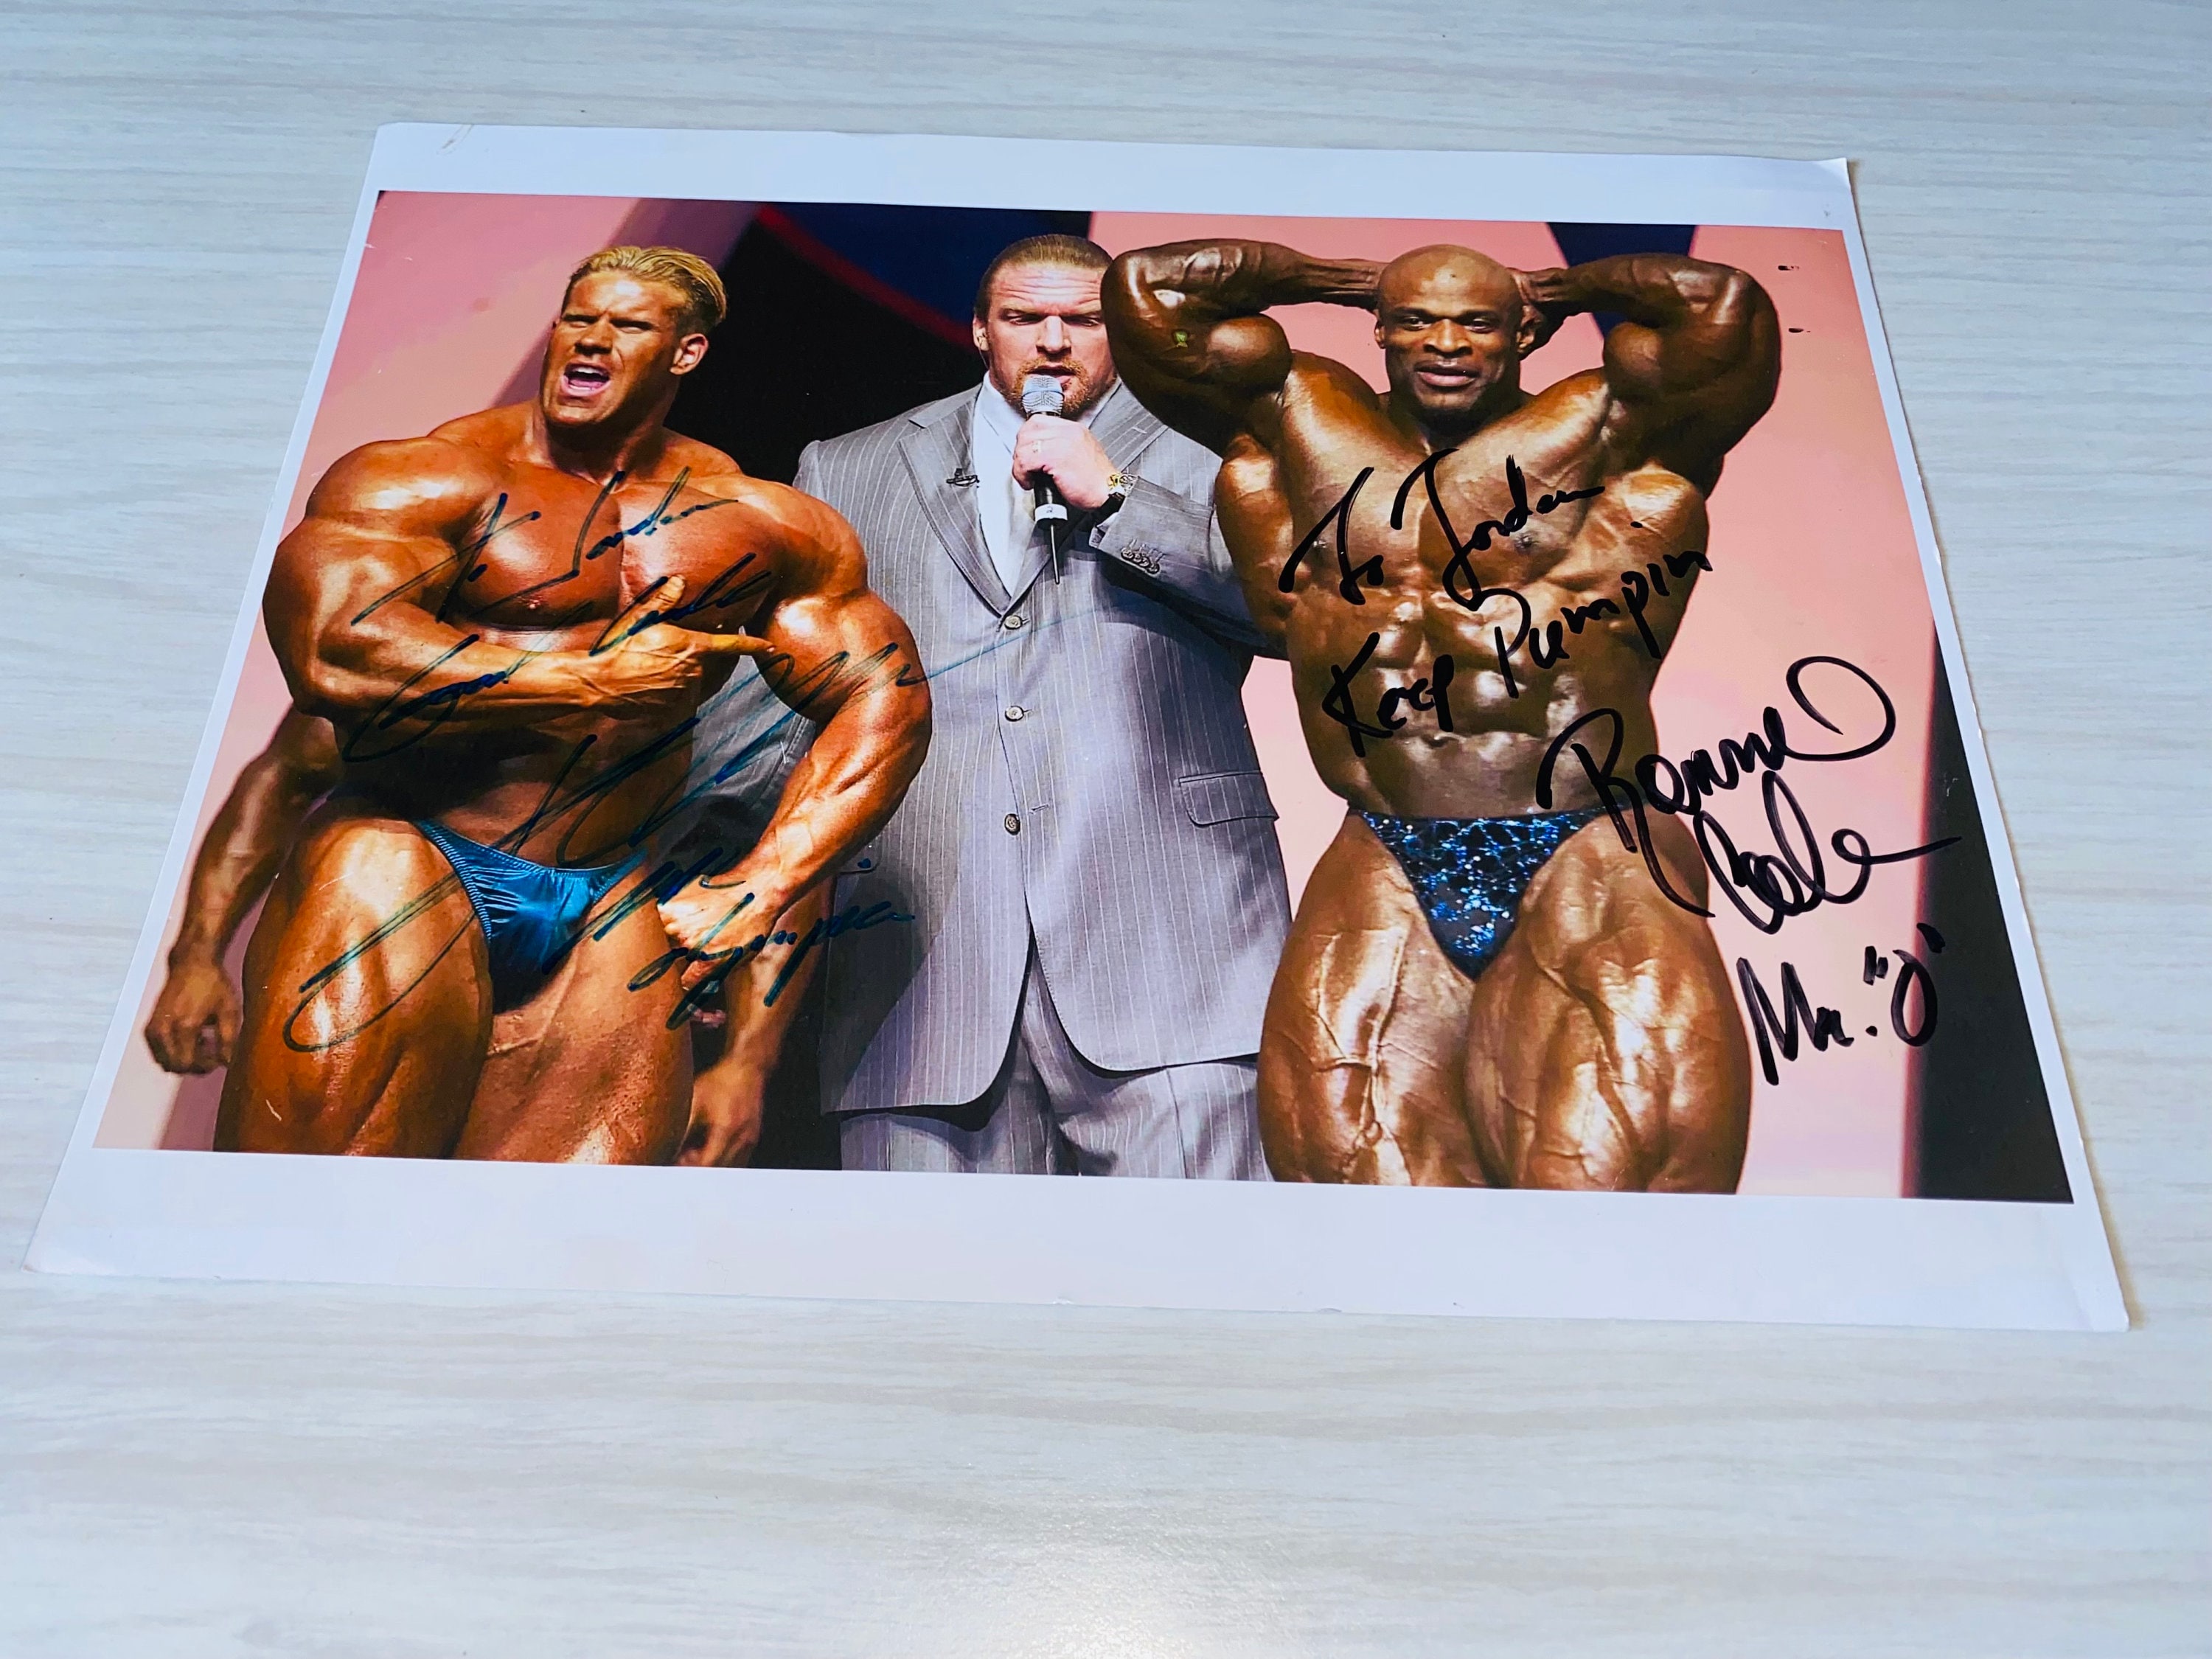  RONNIE COLEMAN BODY BUILDING MR. OLYMPIA 8X10 SPORTS ACTION  PHOTO (QQ): Sports & Outdoors